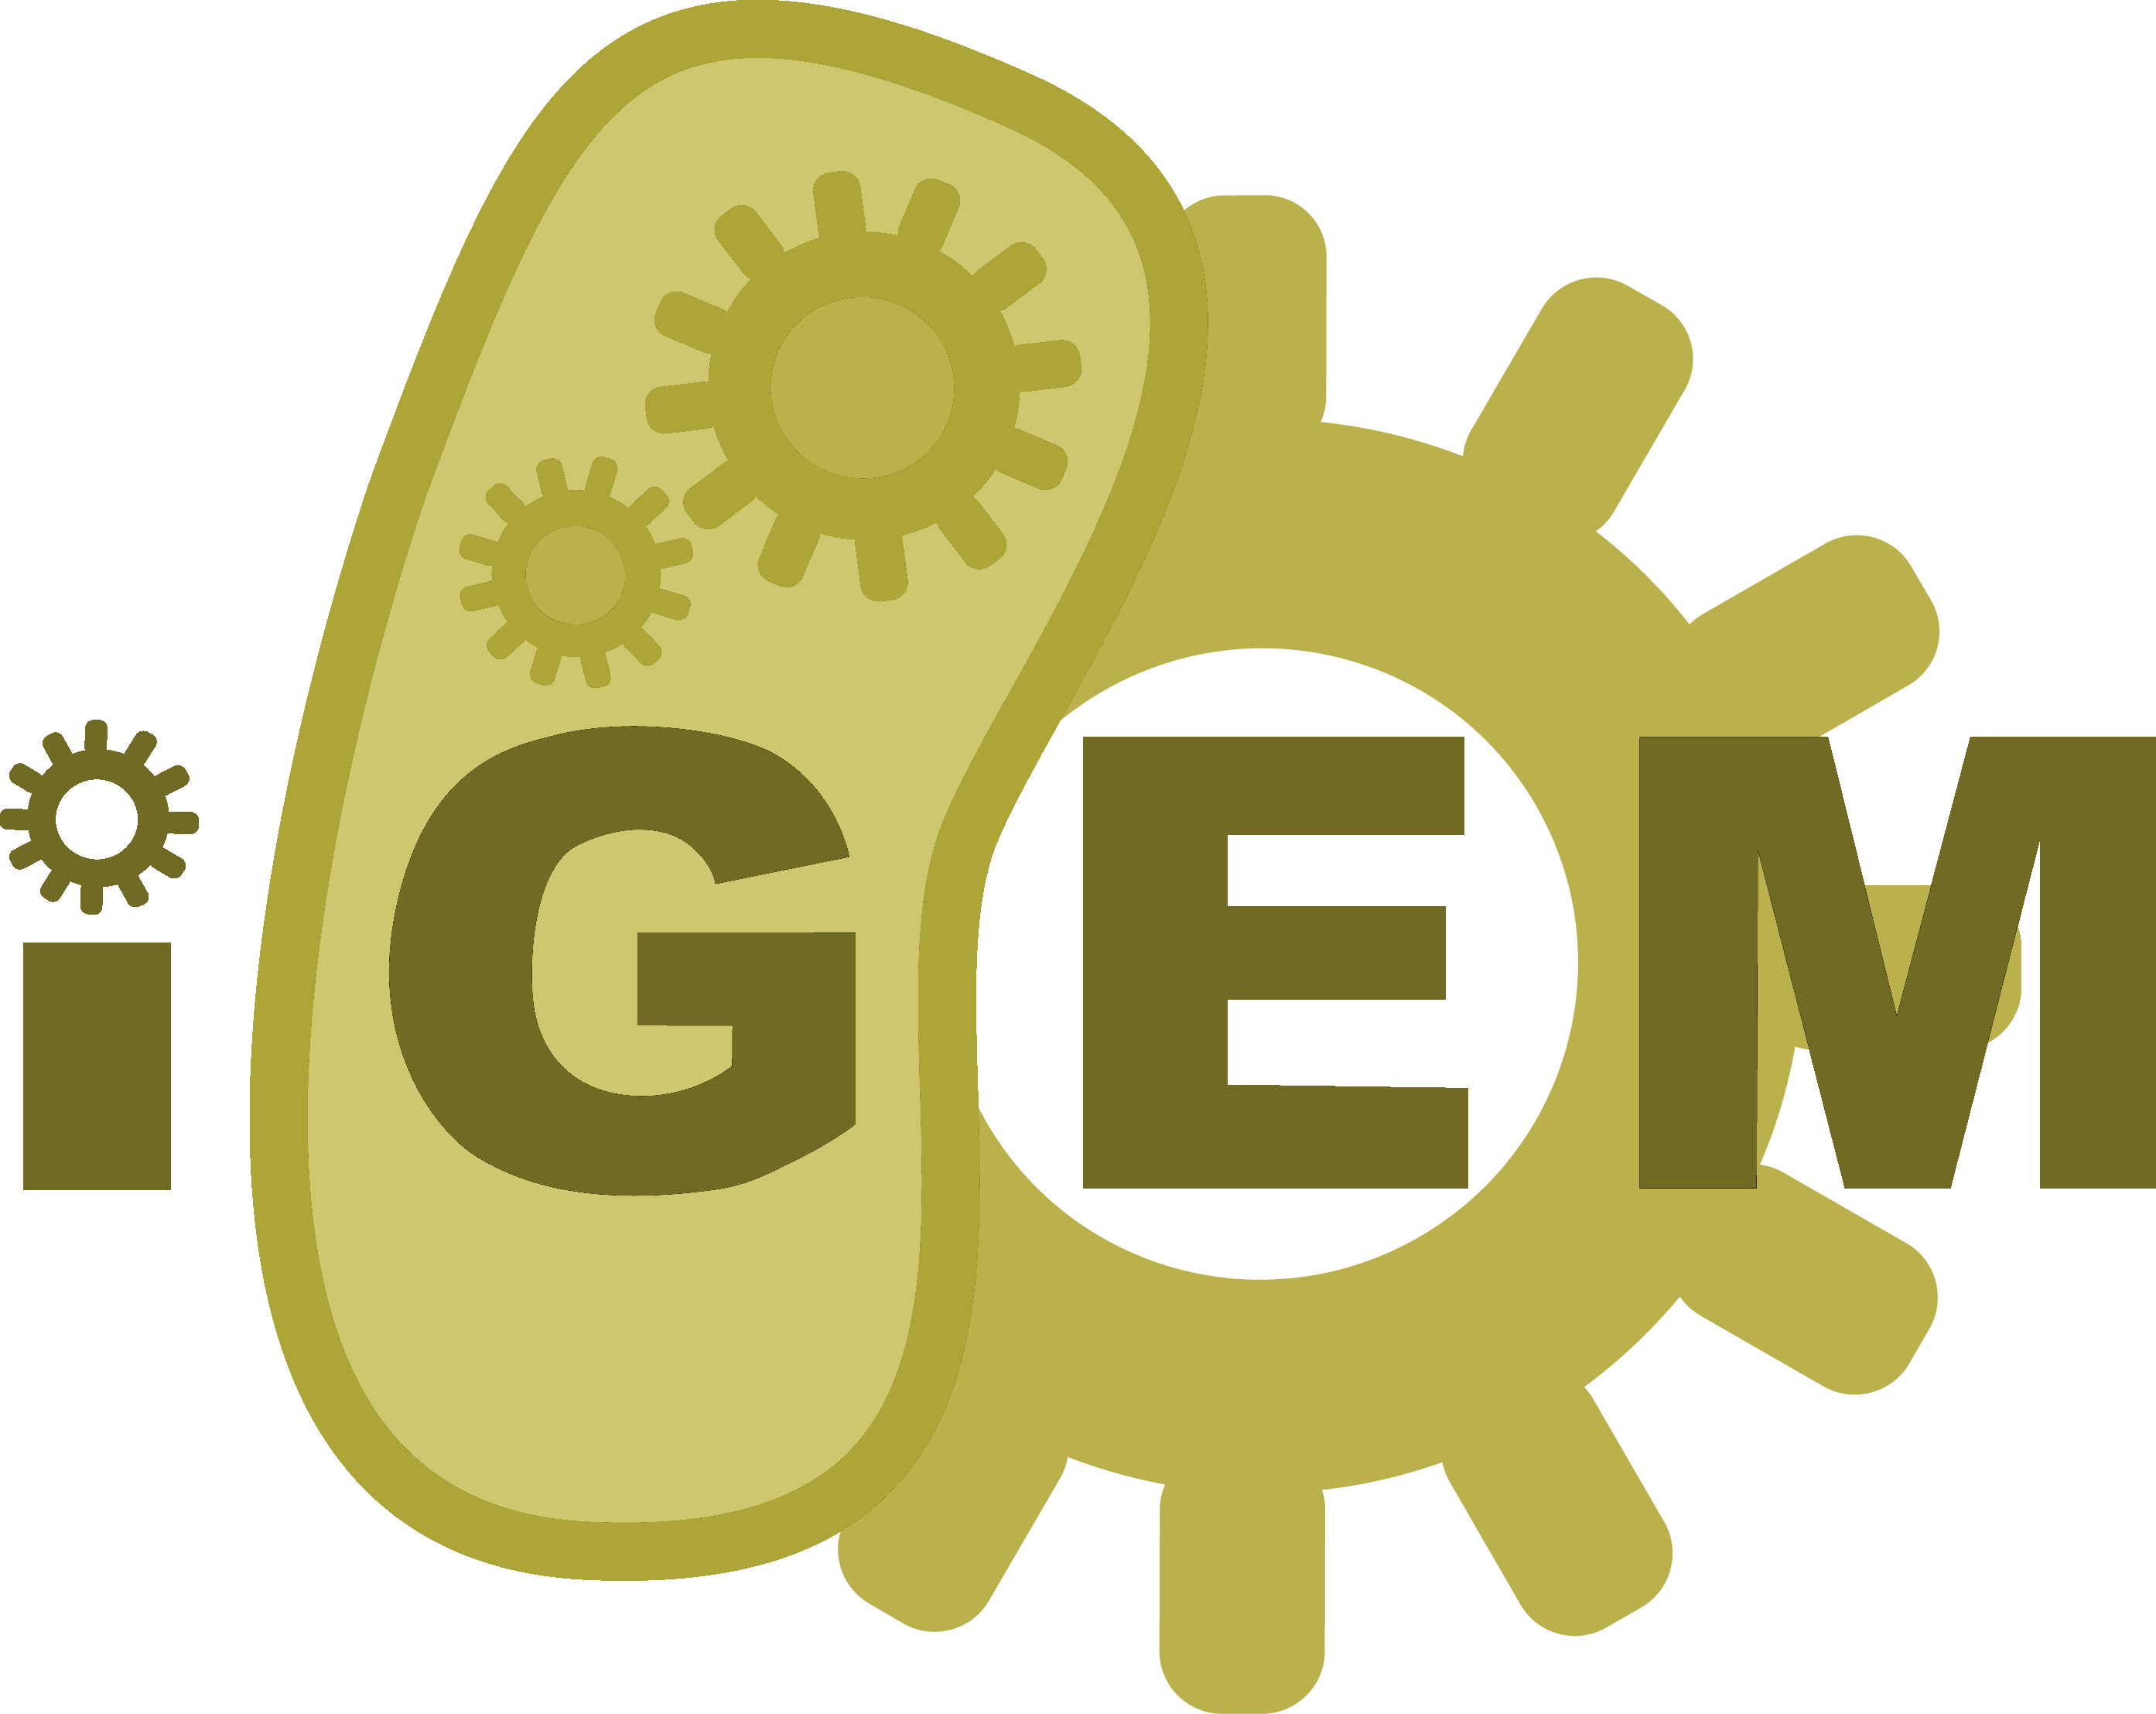 Expand On Your Silver Medal Gold Shield Png - International Genetically Engineered Machine (2787x2215)